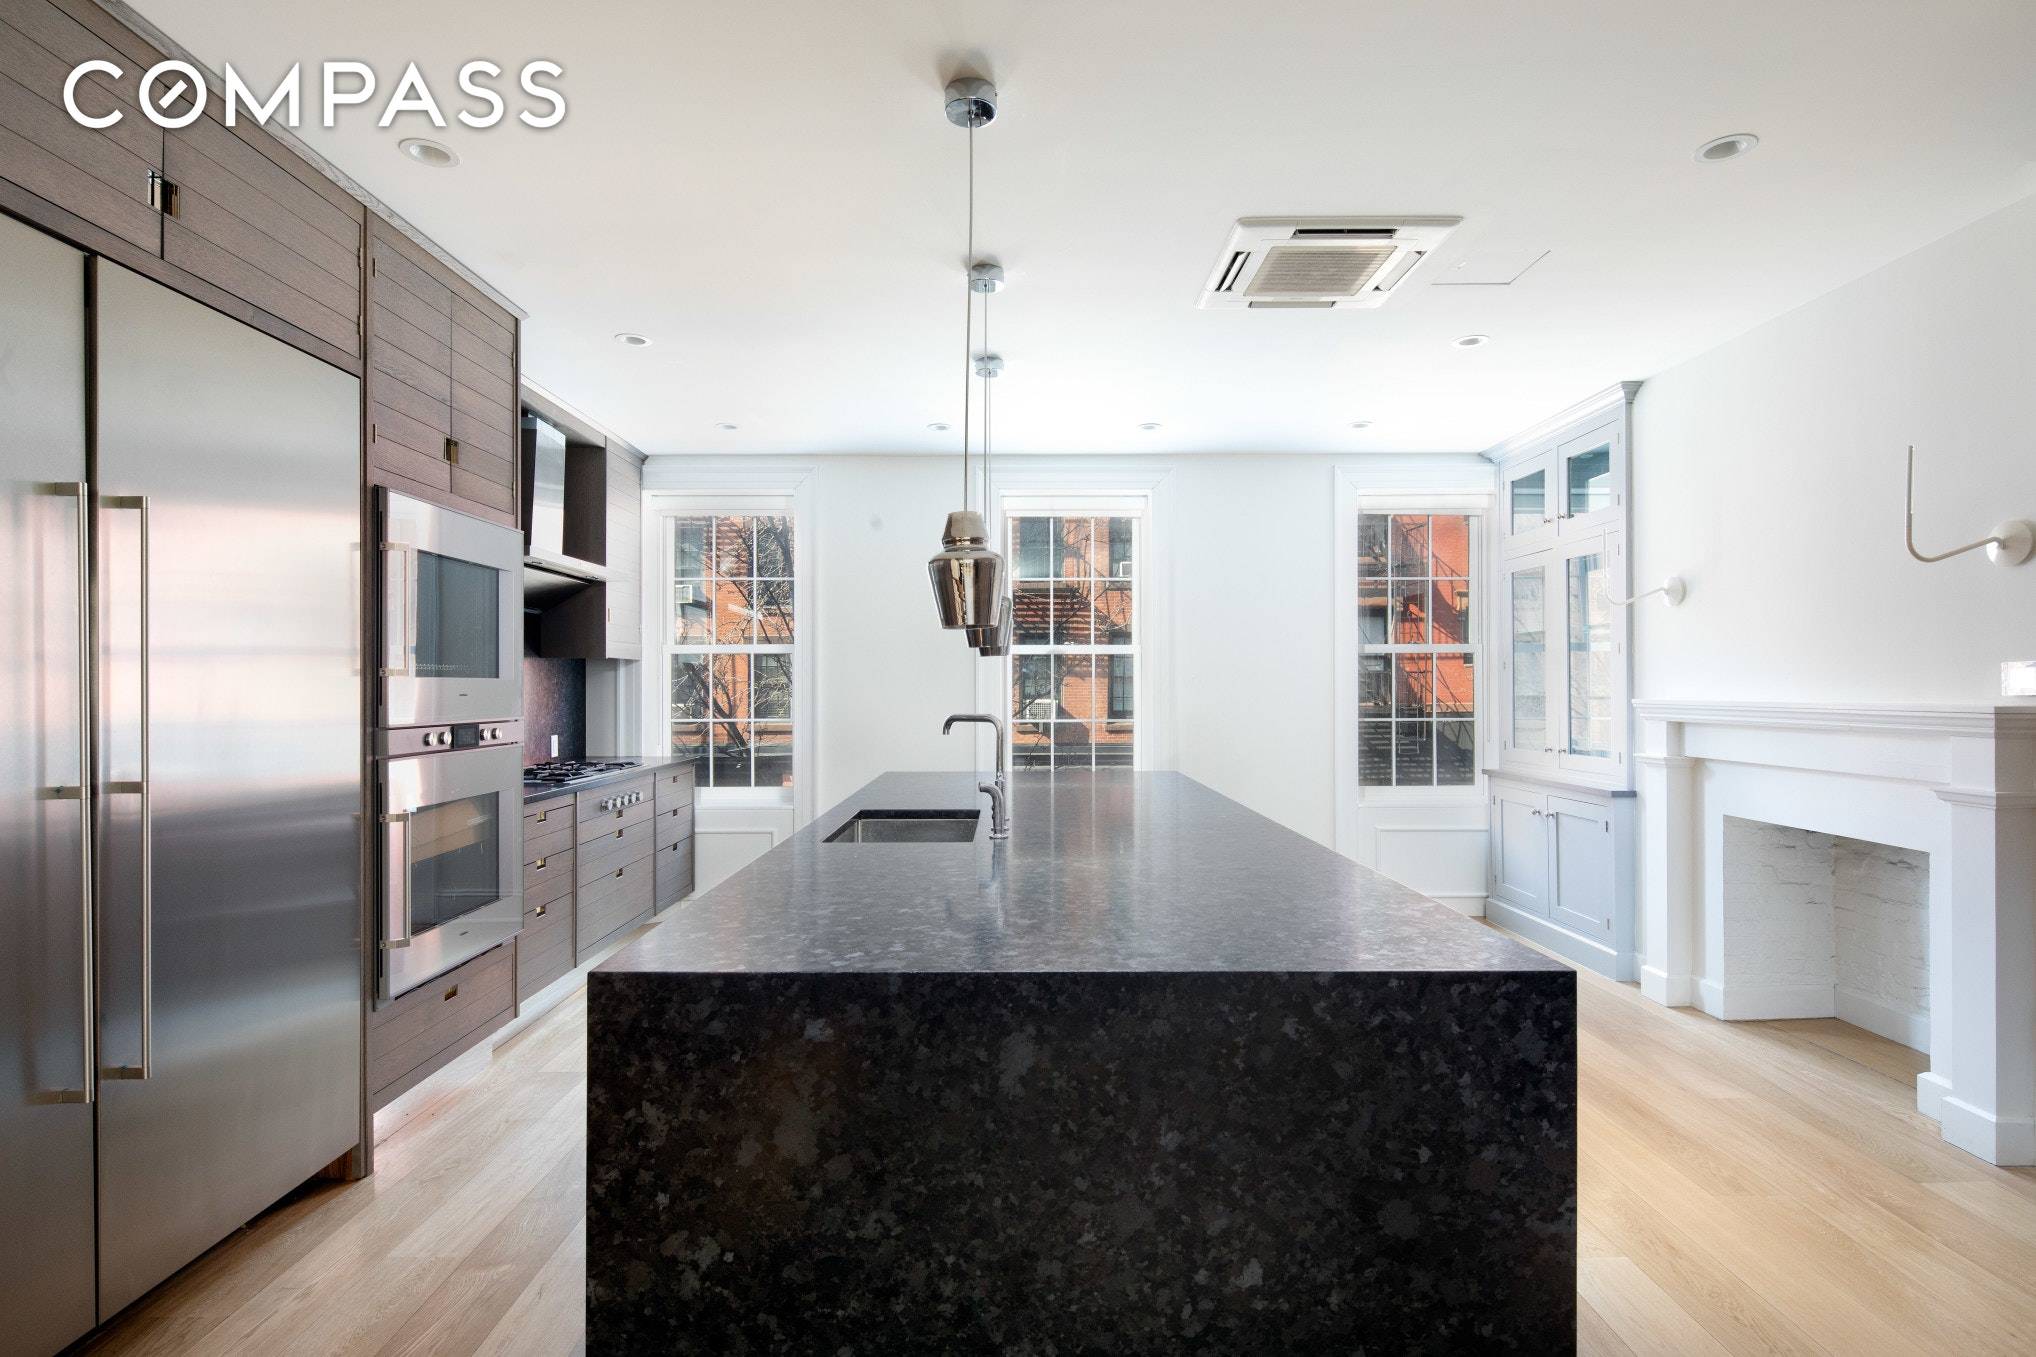 This Bleecker Street meticulously renovated Townhouse is situated on famed Bleecker Street between West 11th Street and Perry Street.